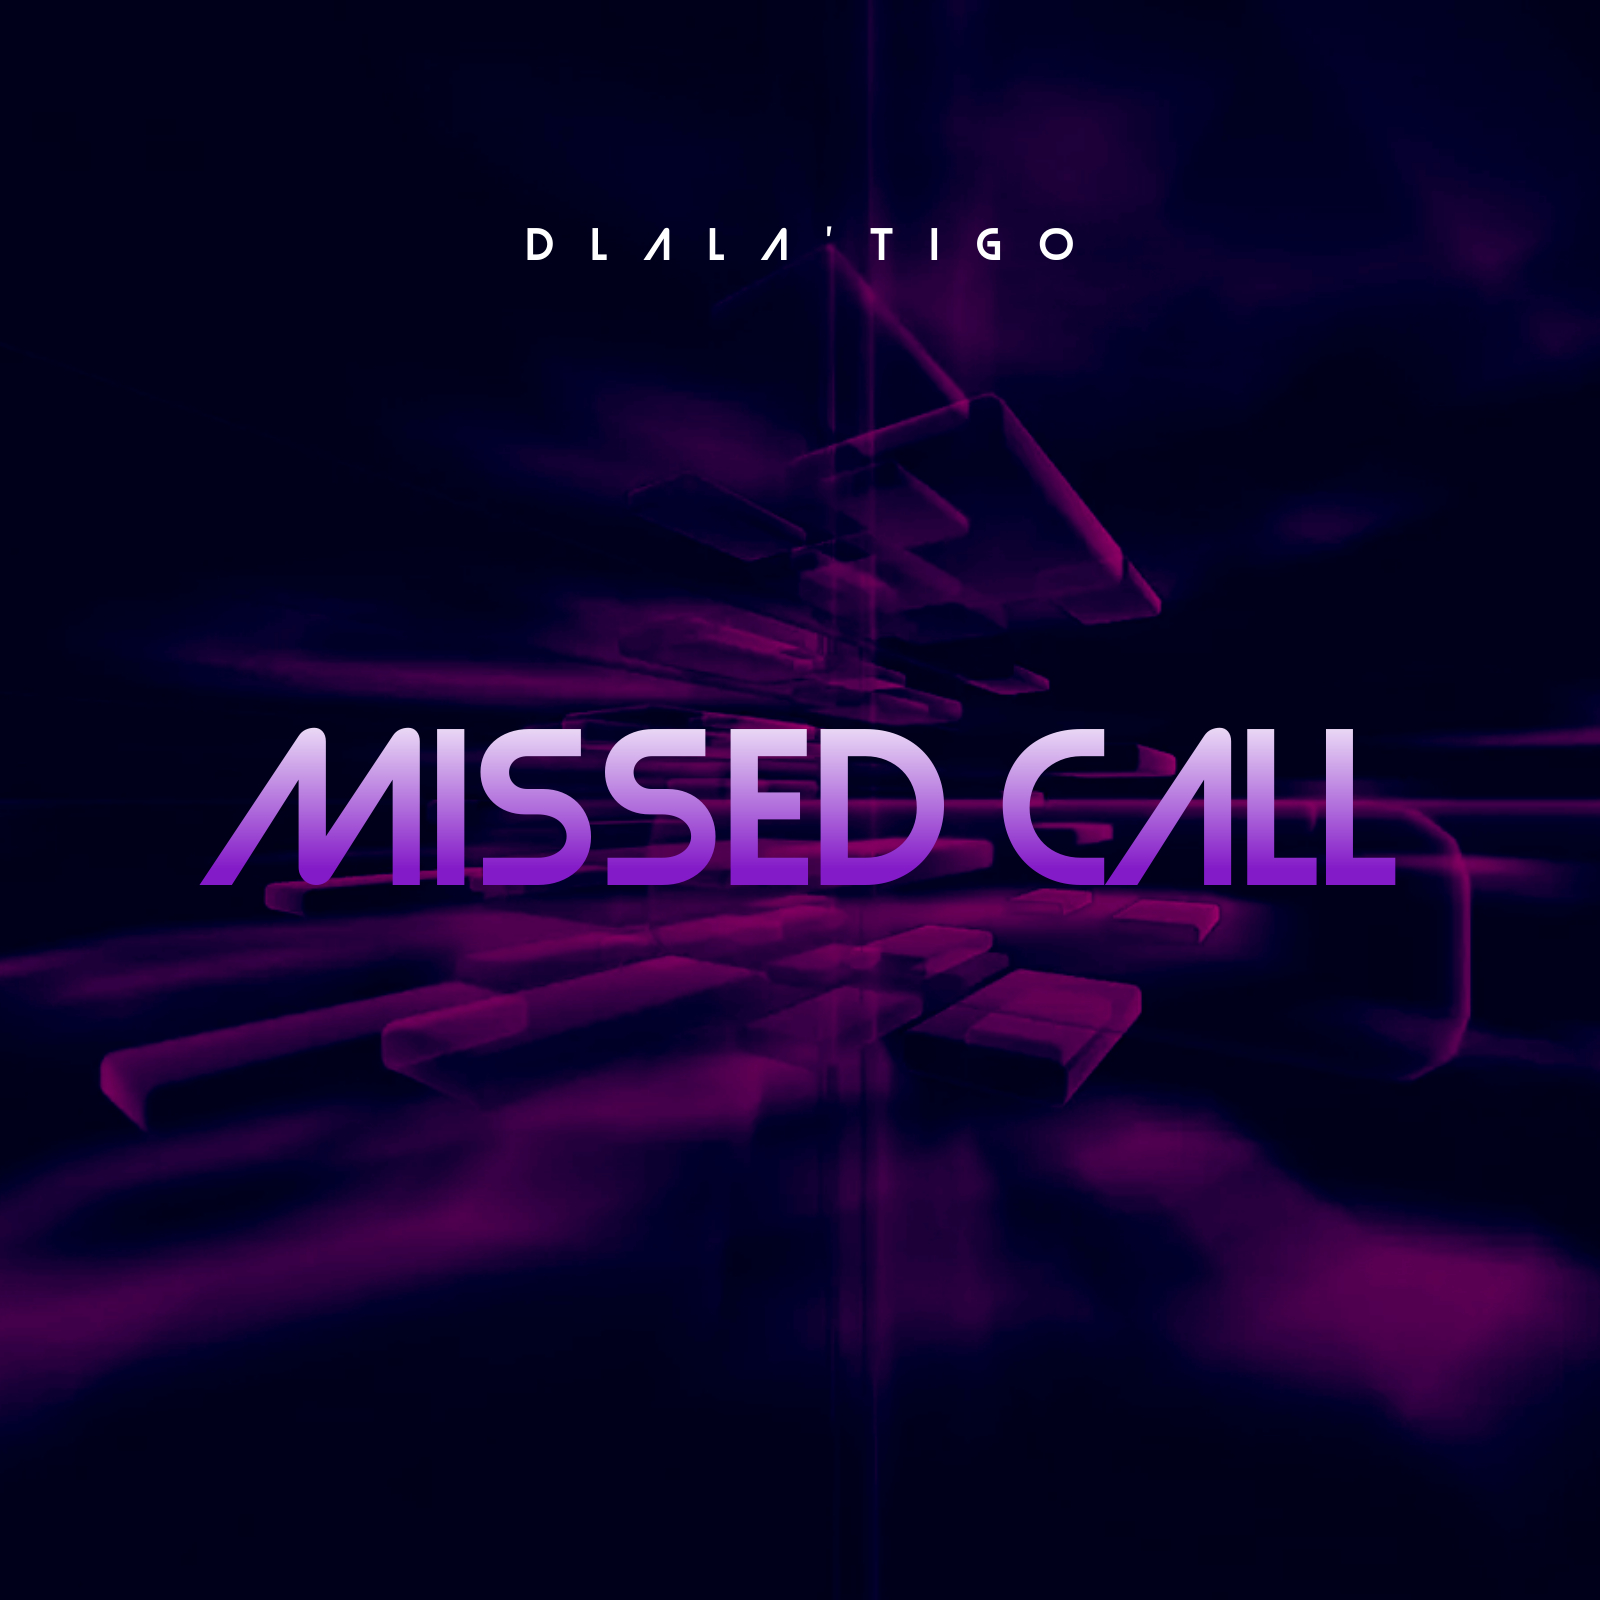 Missed Call Art - Made with PosterMyWall.jpg